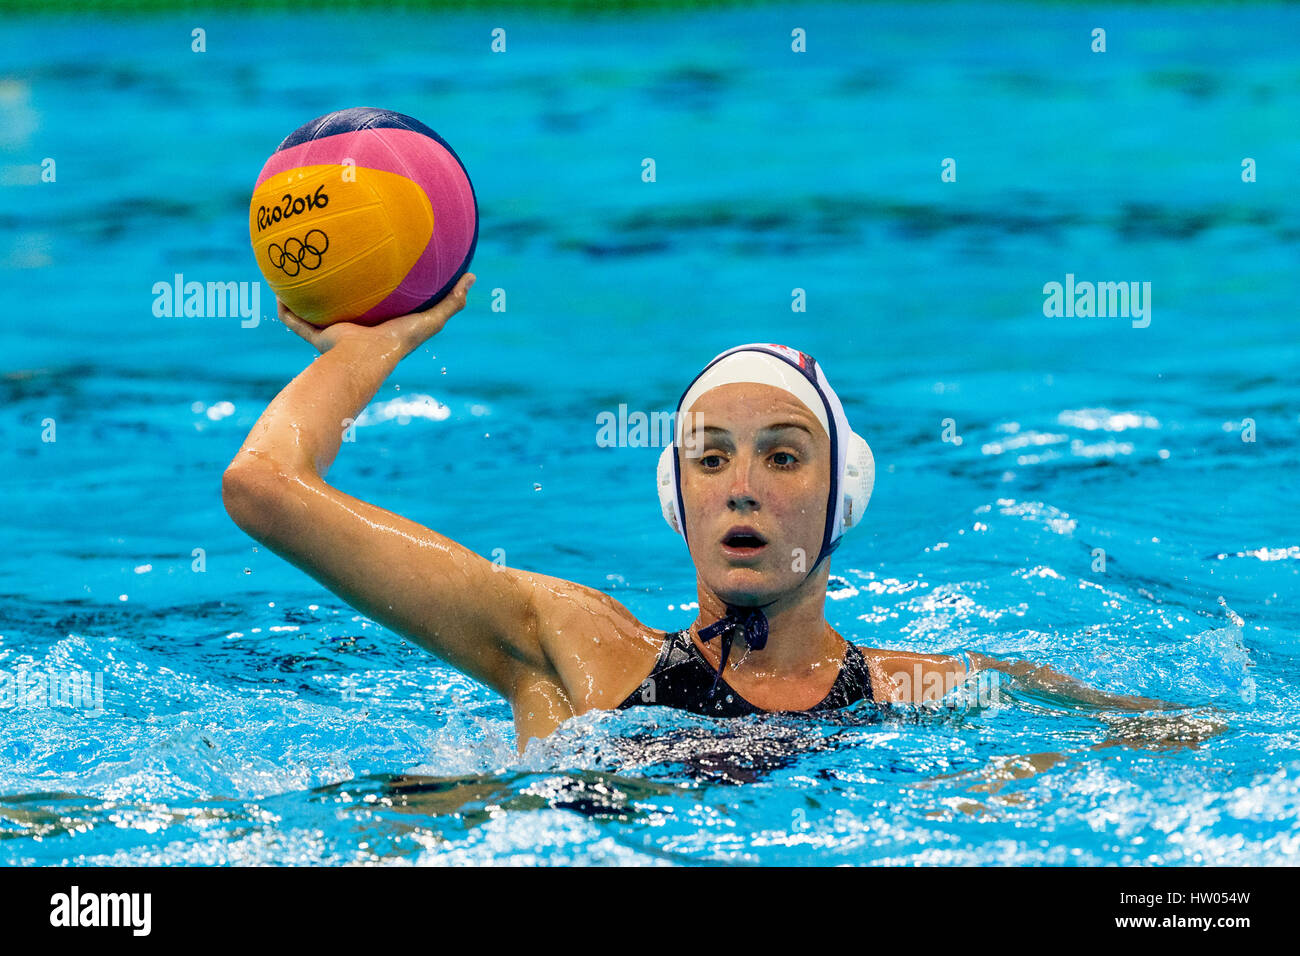 Rio de Janeiro, Brazil. 19 August 2016 Makenzie Fischer (USA) competes in the women's water polo gold medal match vs. Italy at the 2016 Olympic Summer Stock Photo